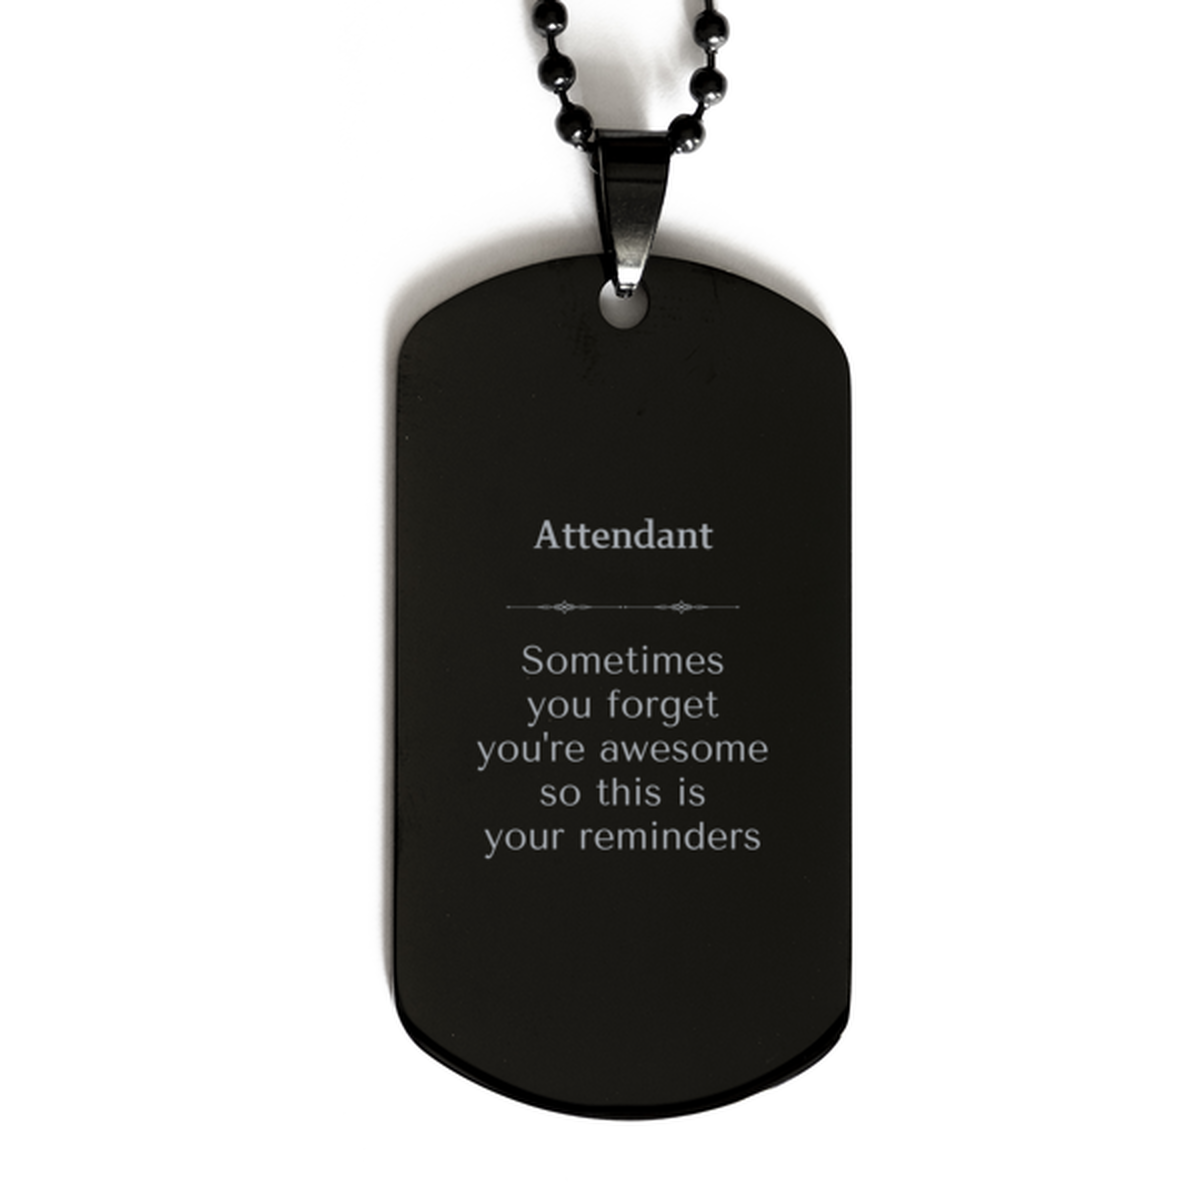 Sentimental Attendant Black Dog Tag, Attendant Sometimes you forget you're awesome so this is your reminders, Graduation Christmas Birthday Gifts for Attendant, Men, Women, Coworkers